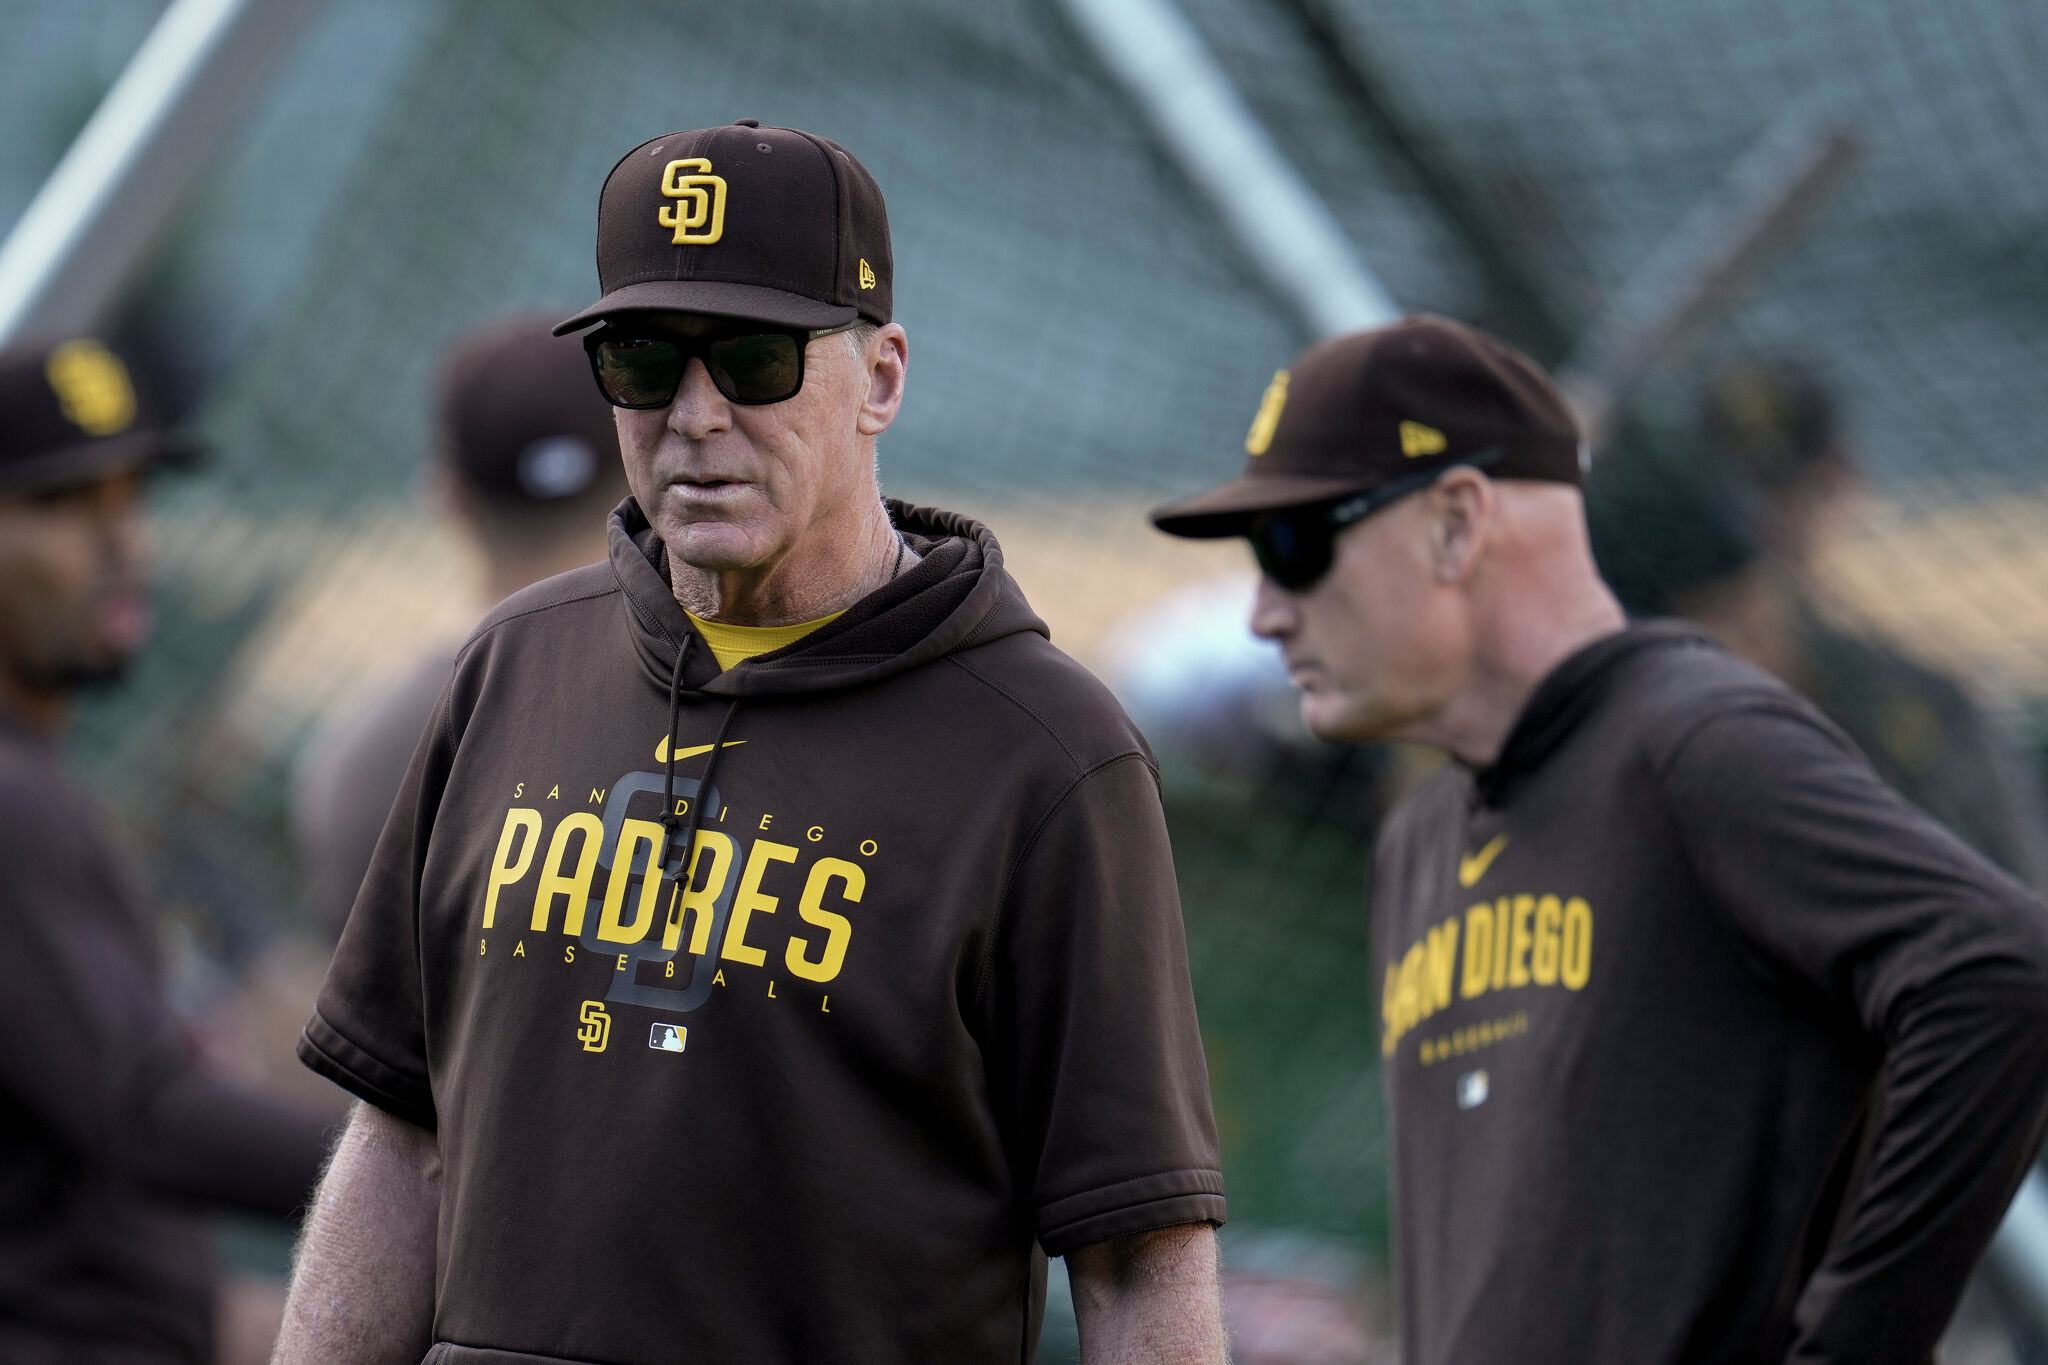 PADRES - Bob has passed away Jan.2023 this site is no longer available to  the public.